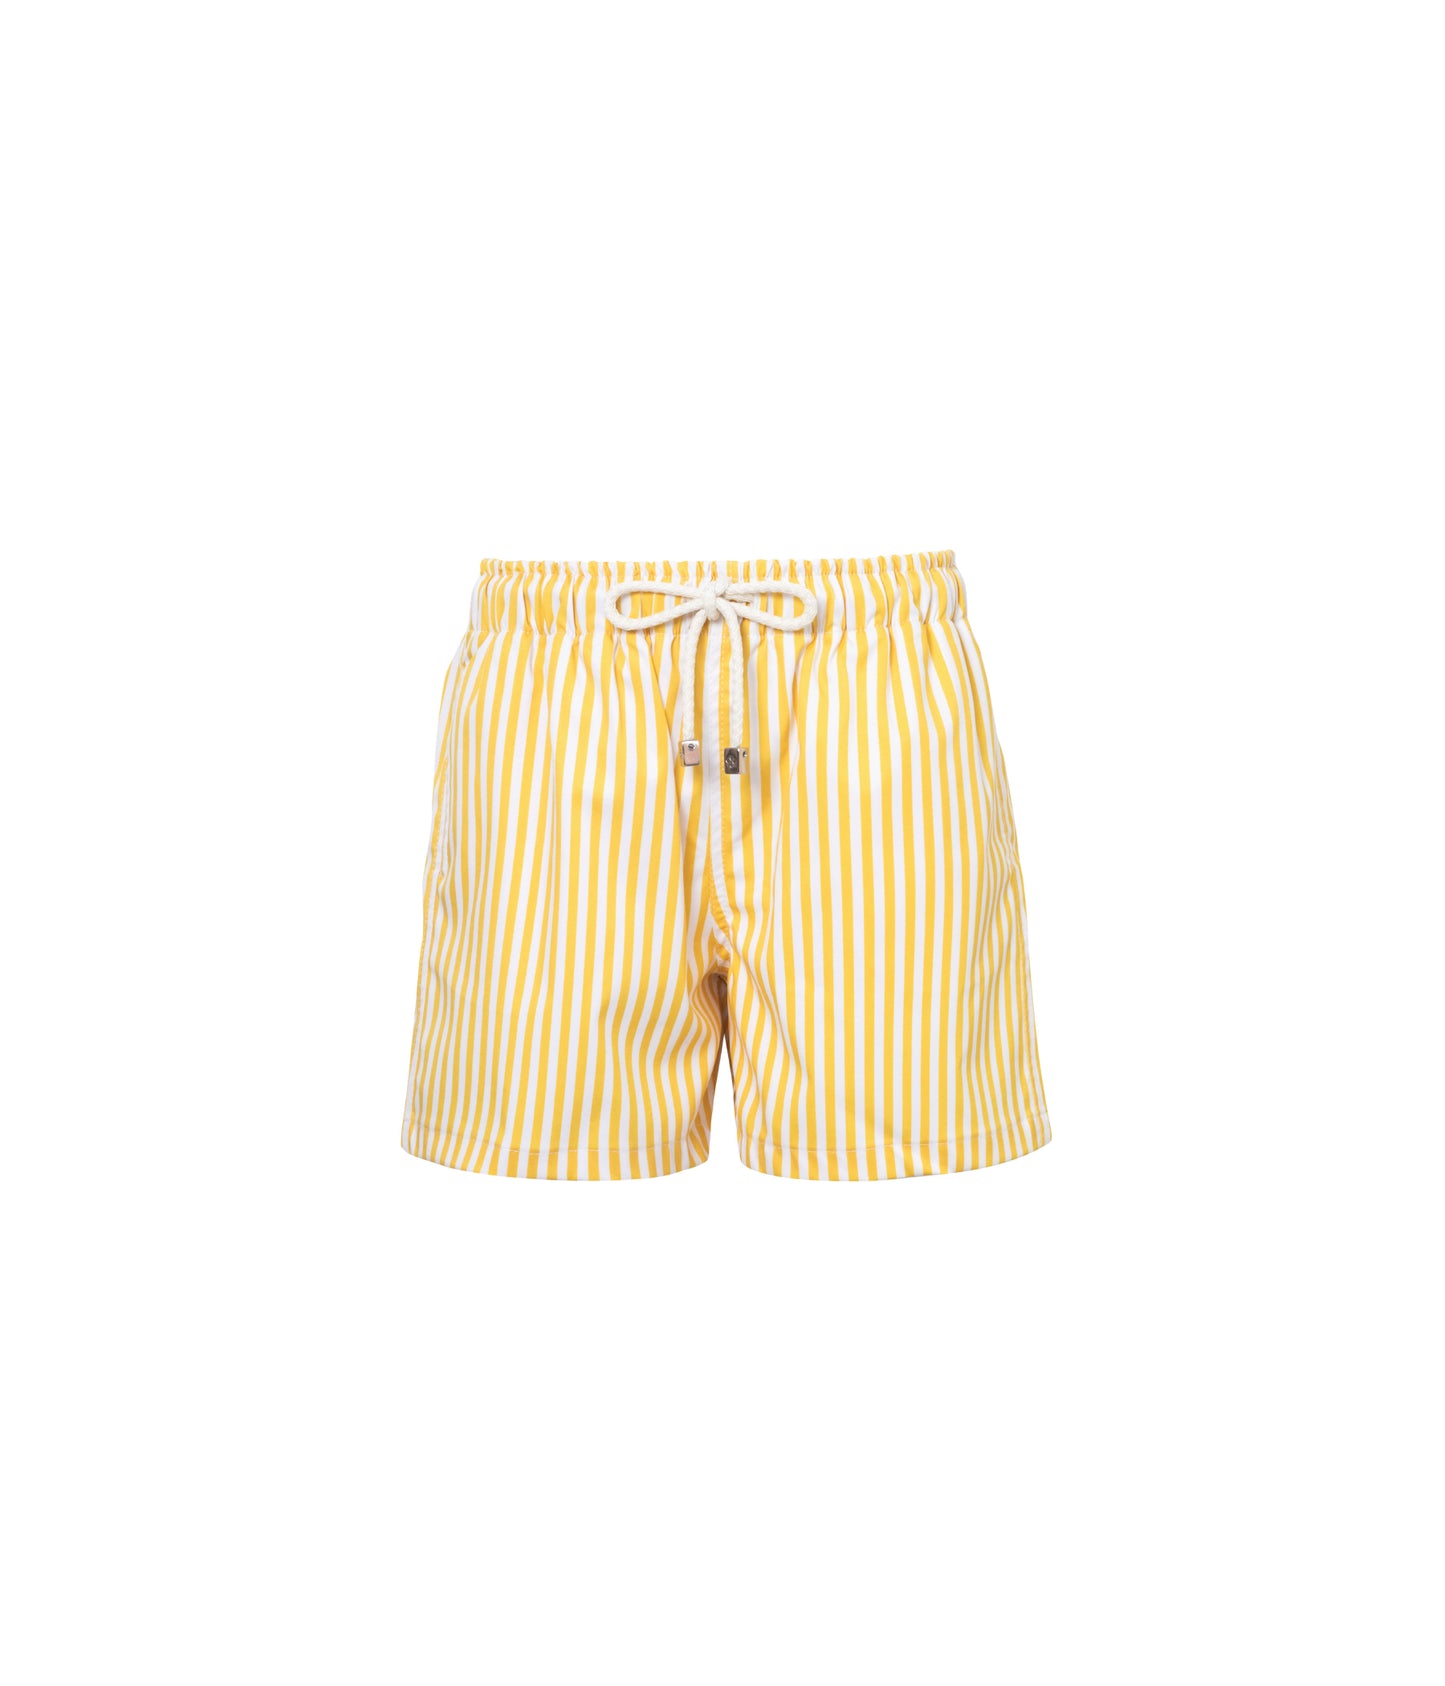 Load image into Gallery viewer, Verdelimon - Swim Trunk - Limones Loulou - Yellow Stripes Loulou - Front
